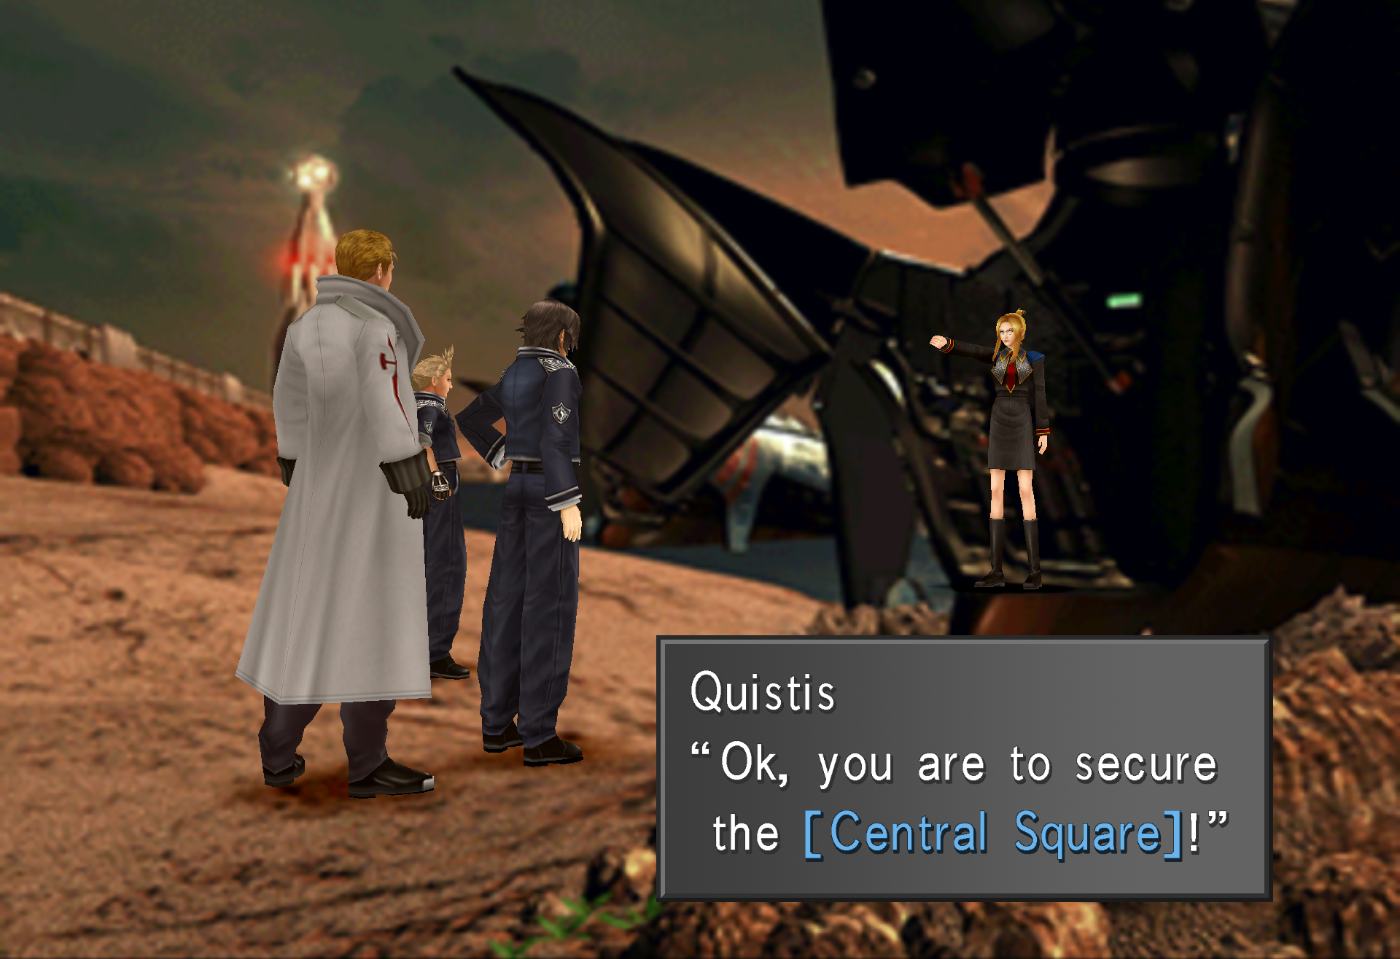 Quistis instructing Squall and Seifer to secure the Central Square.re.